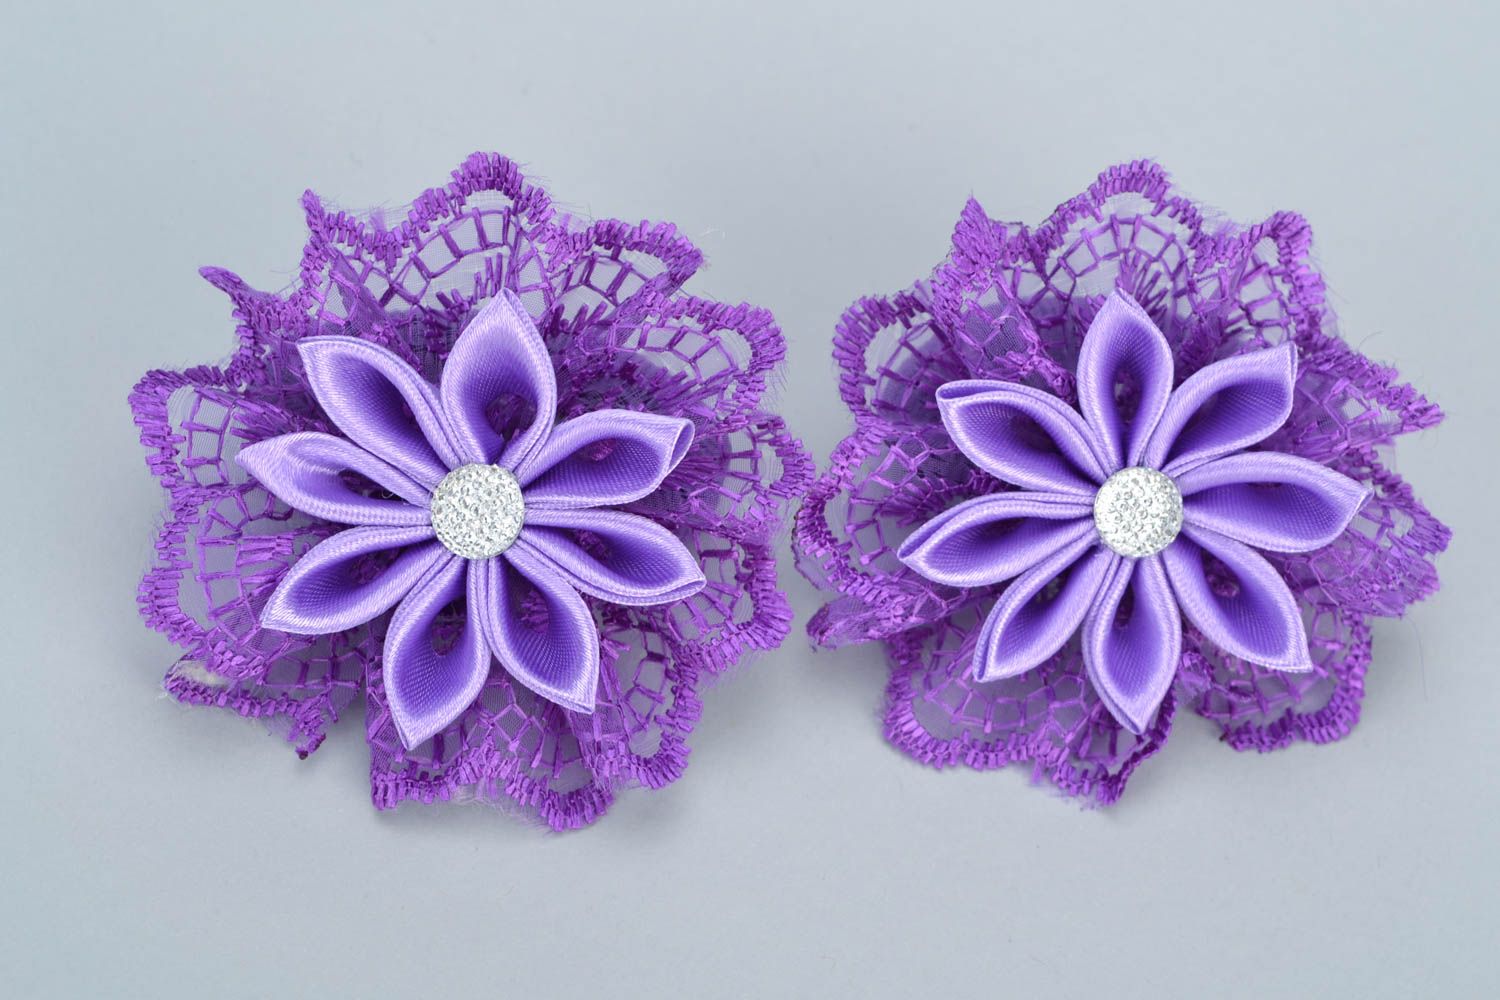 Handmade purple scrunchies with flowers made of satin ribbons kanzashi technique 2 pieces photo 5